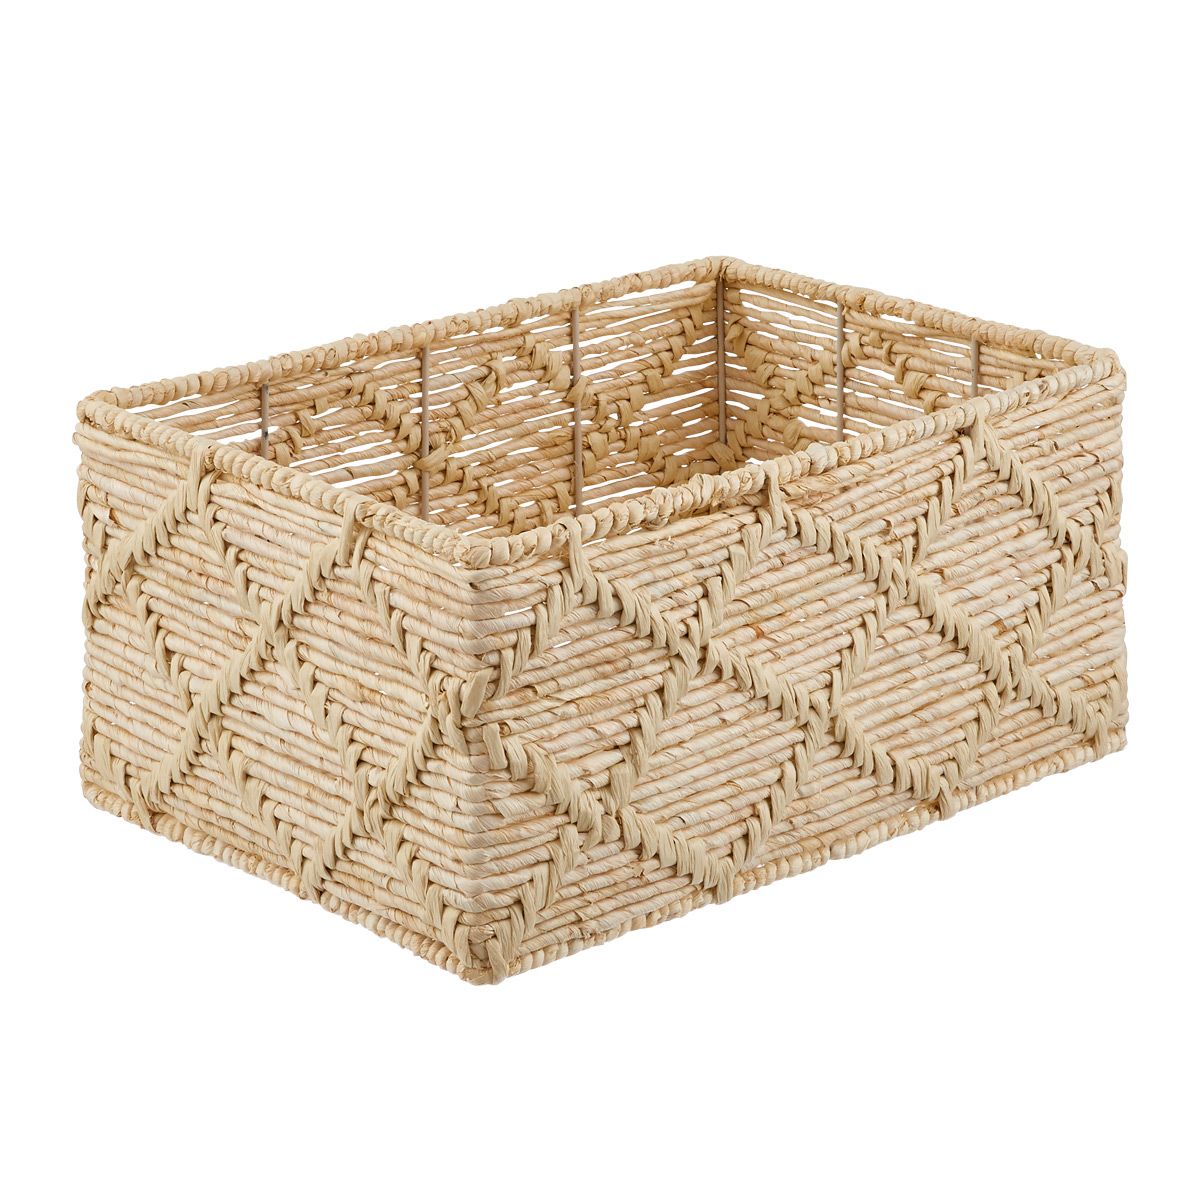 Trellis Maize Bin | The Container Store